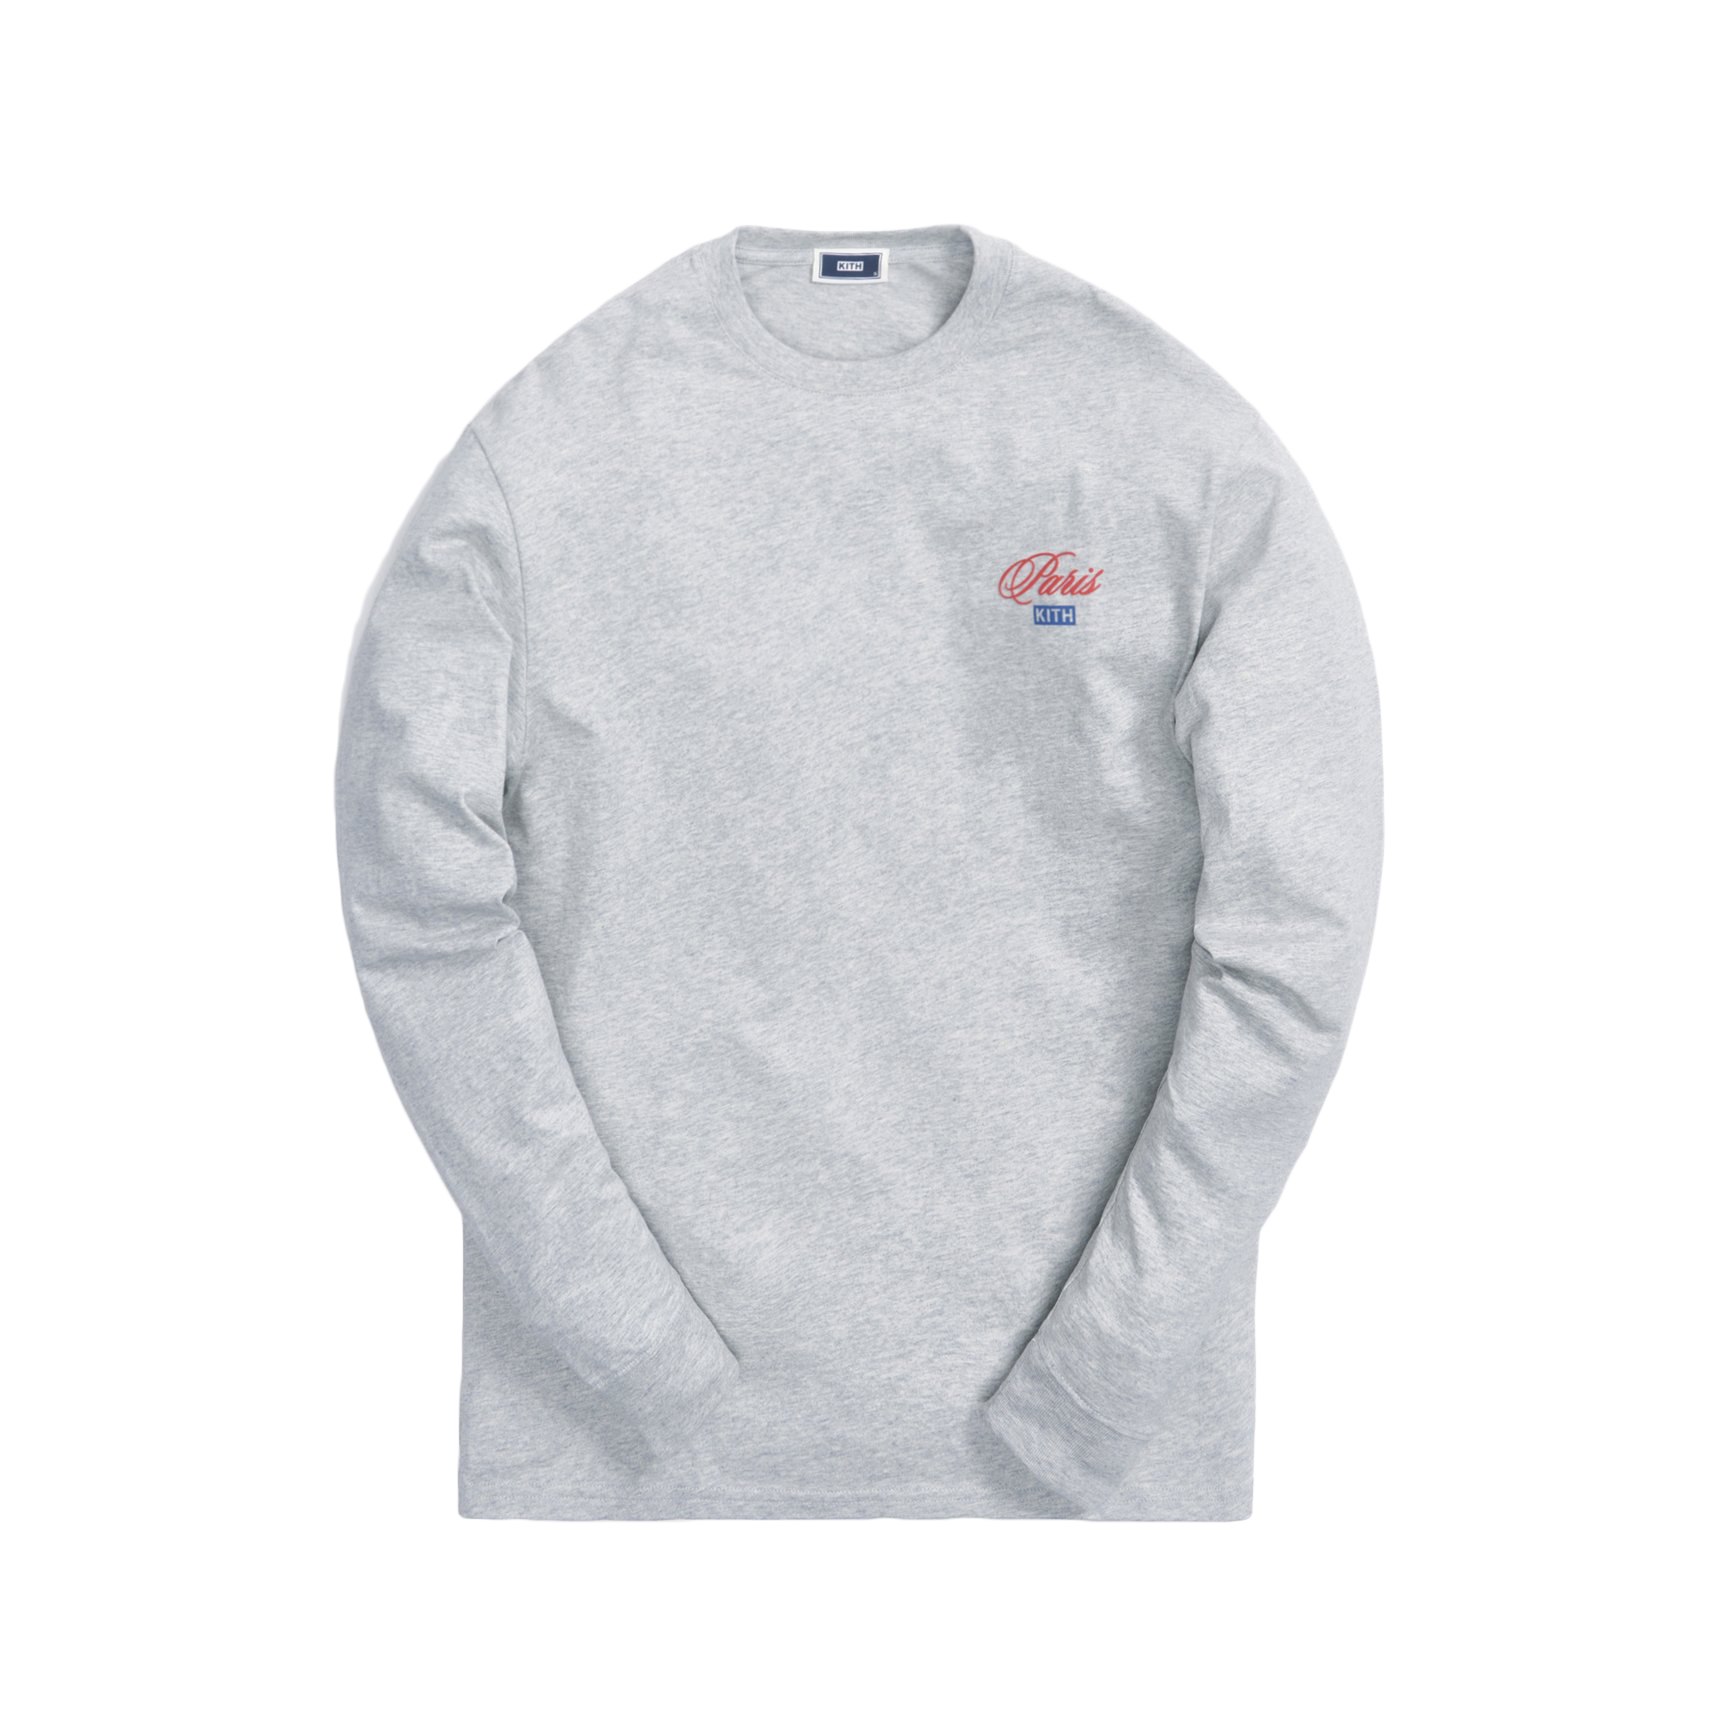 Kith Paris Opening L/S Tee Light Heather Grey Hombre - SS21 - ES